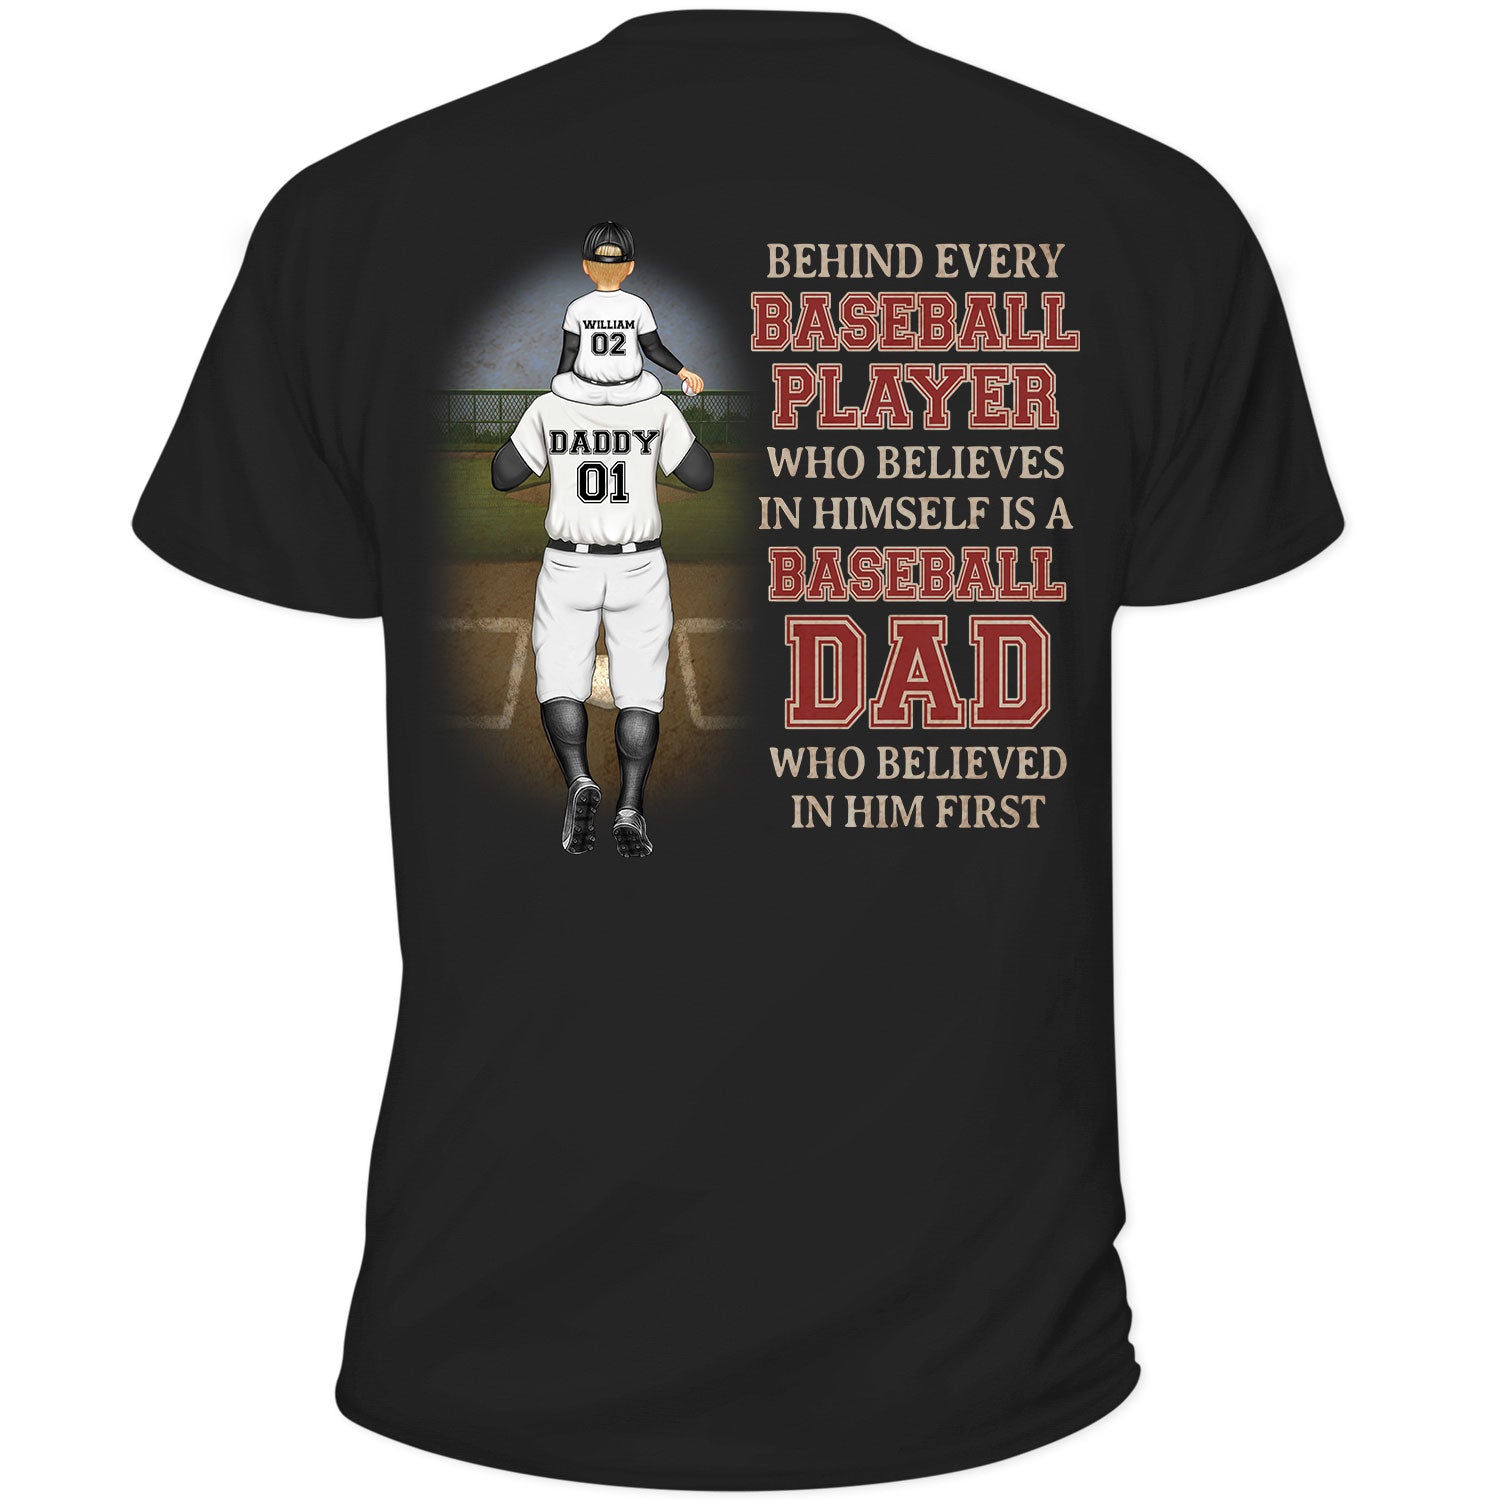 Behind Every Baseball Player - Gift For Father, Sport Fans - Personalized T Shirt